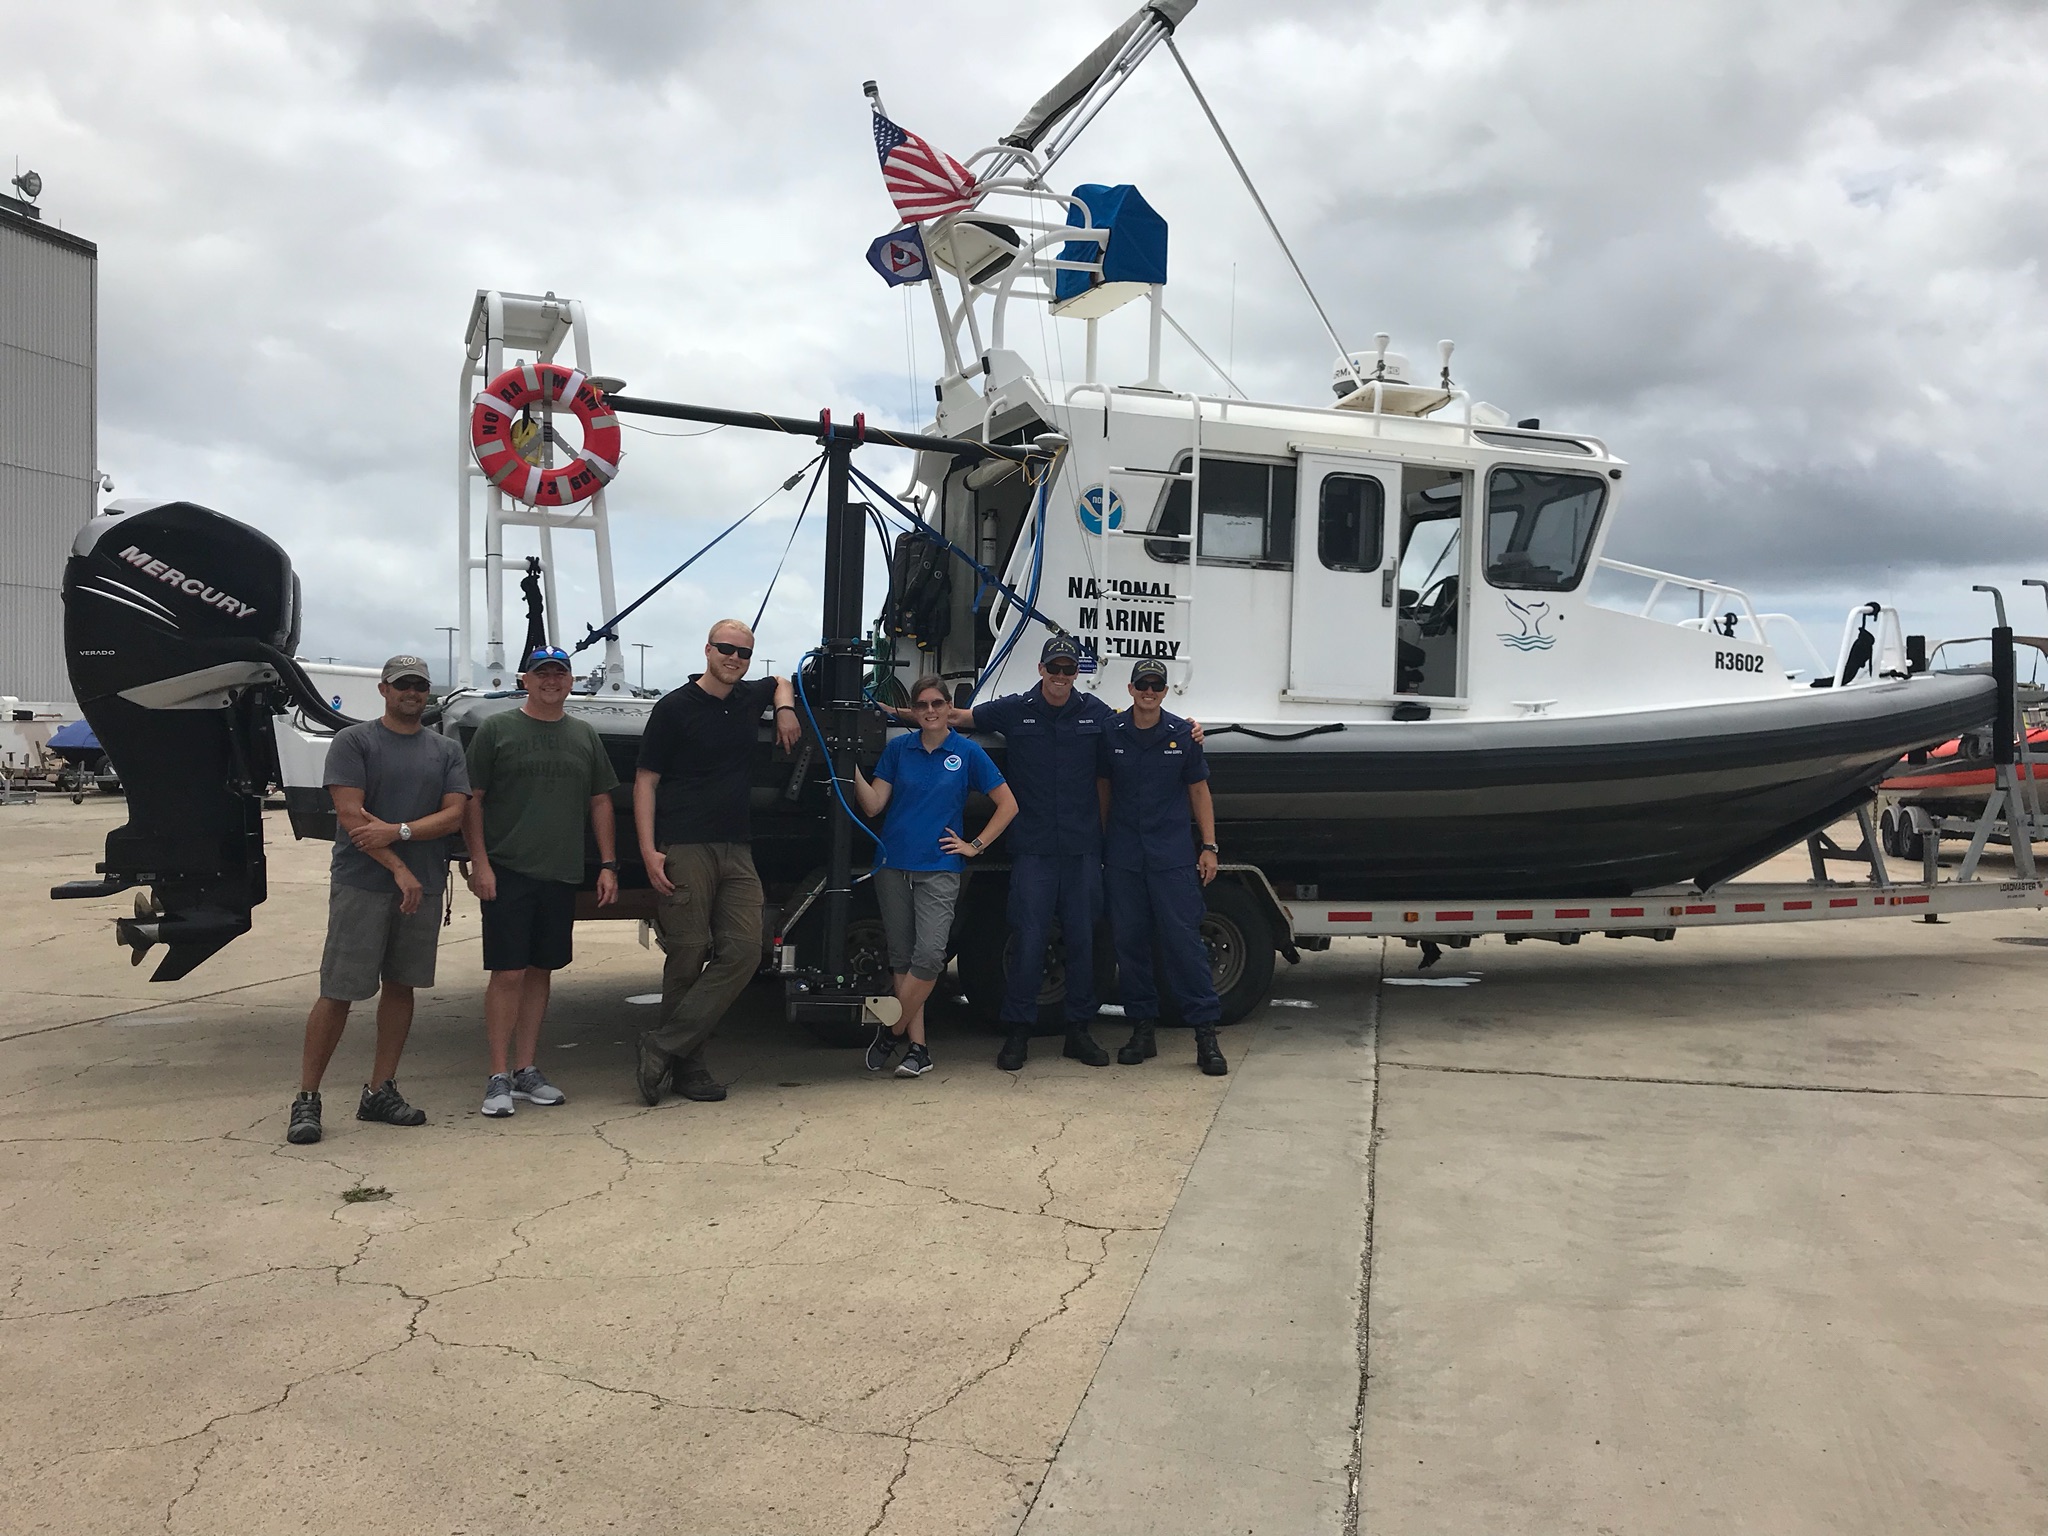 Coast Survey’s hydrographic survey experts along with the Office of National Marine Sanctuary staff are ready to survey Honolulu Channel following Hurricane Lane.